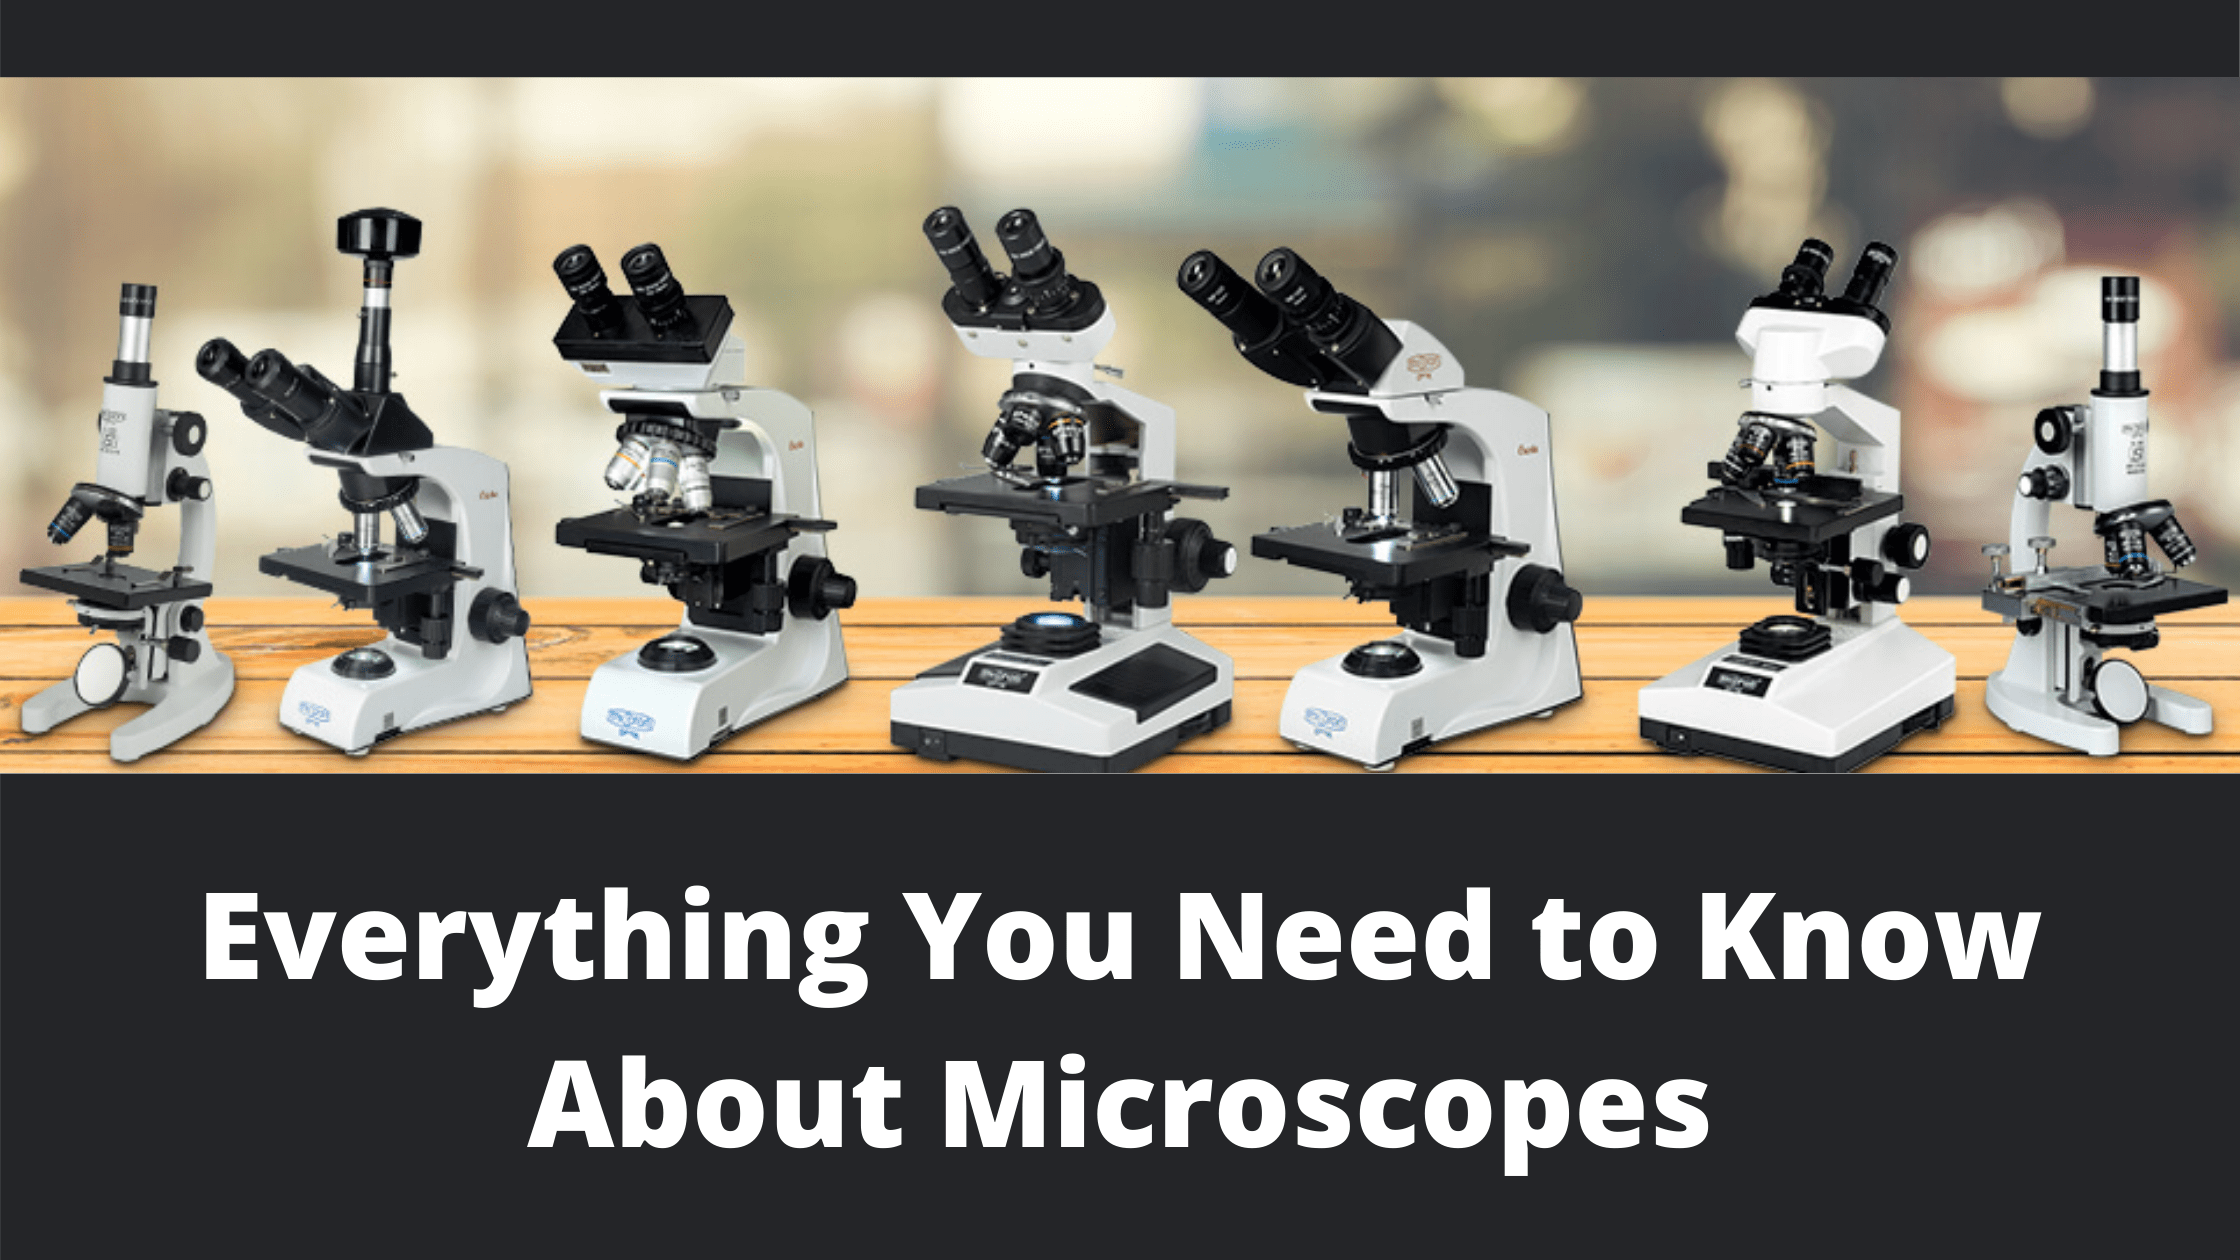 Everything You Need to Know About Microscopes